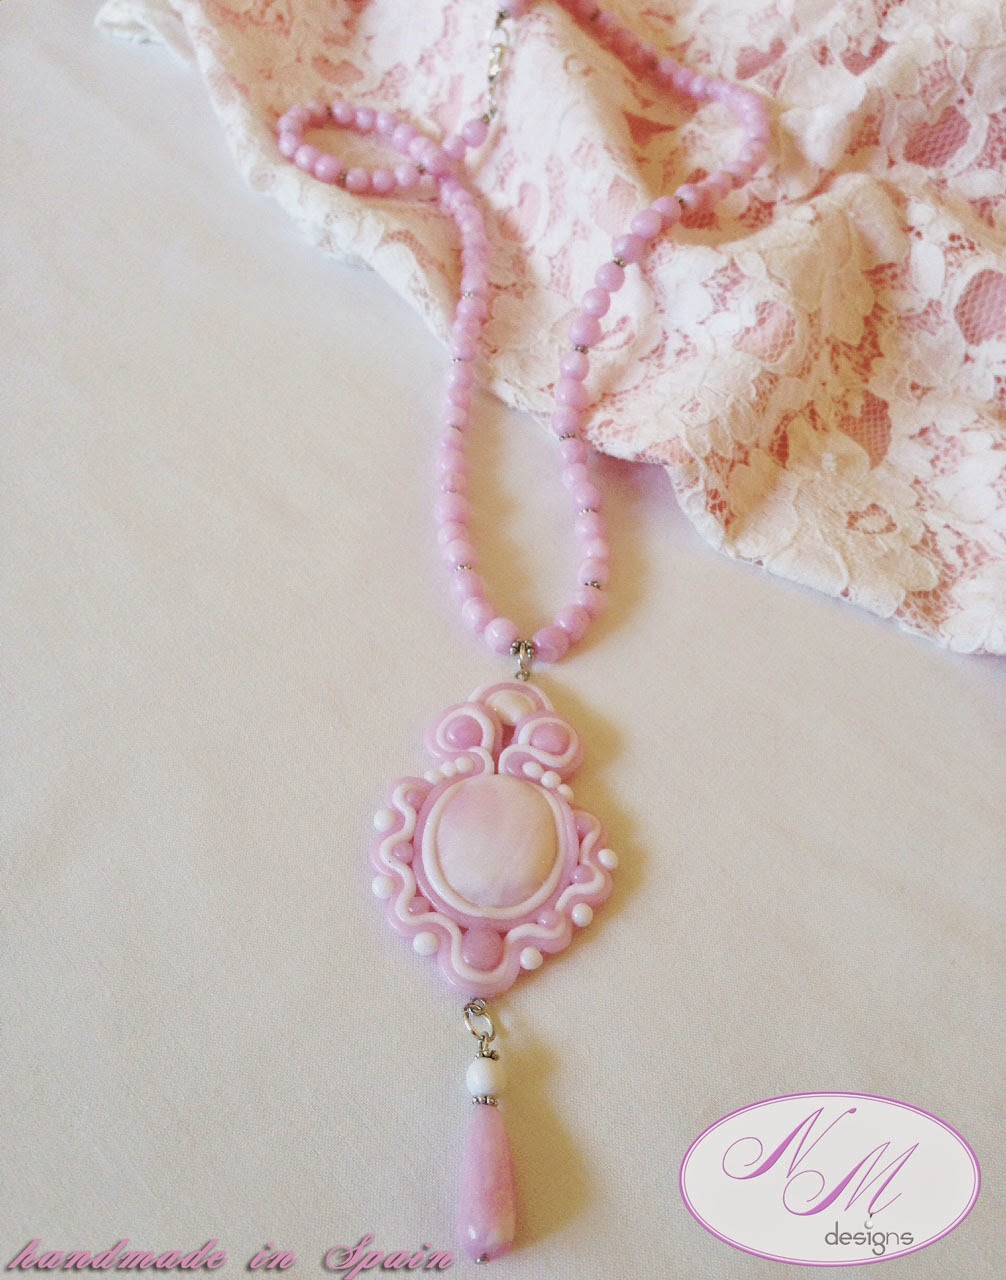 "Pink Lace" NM Designs